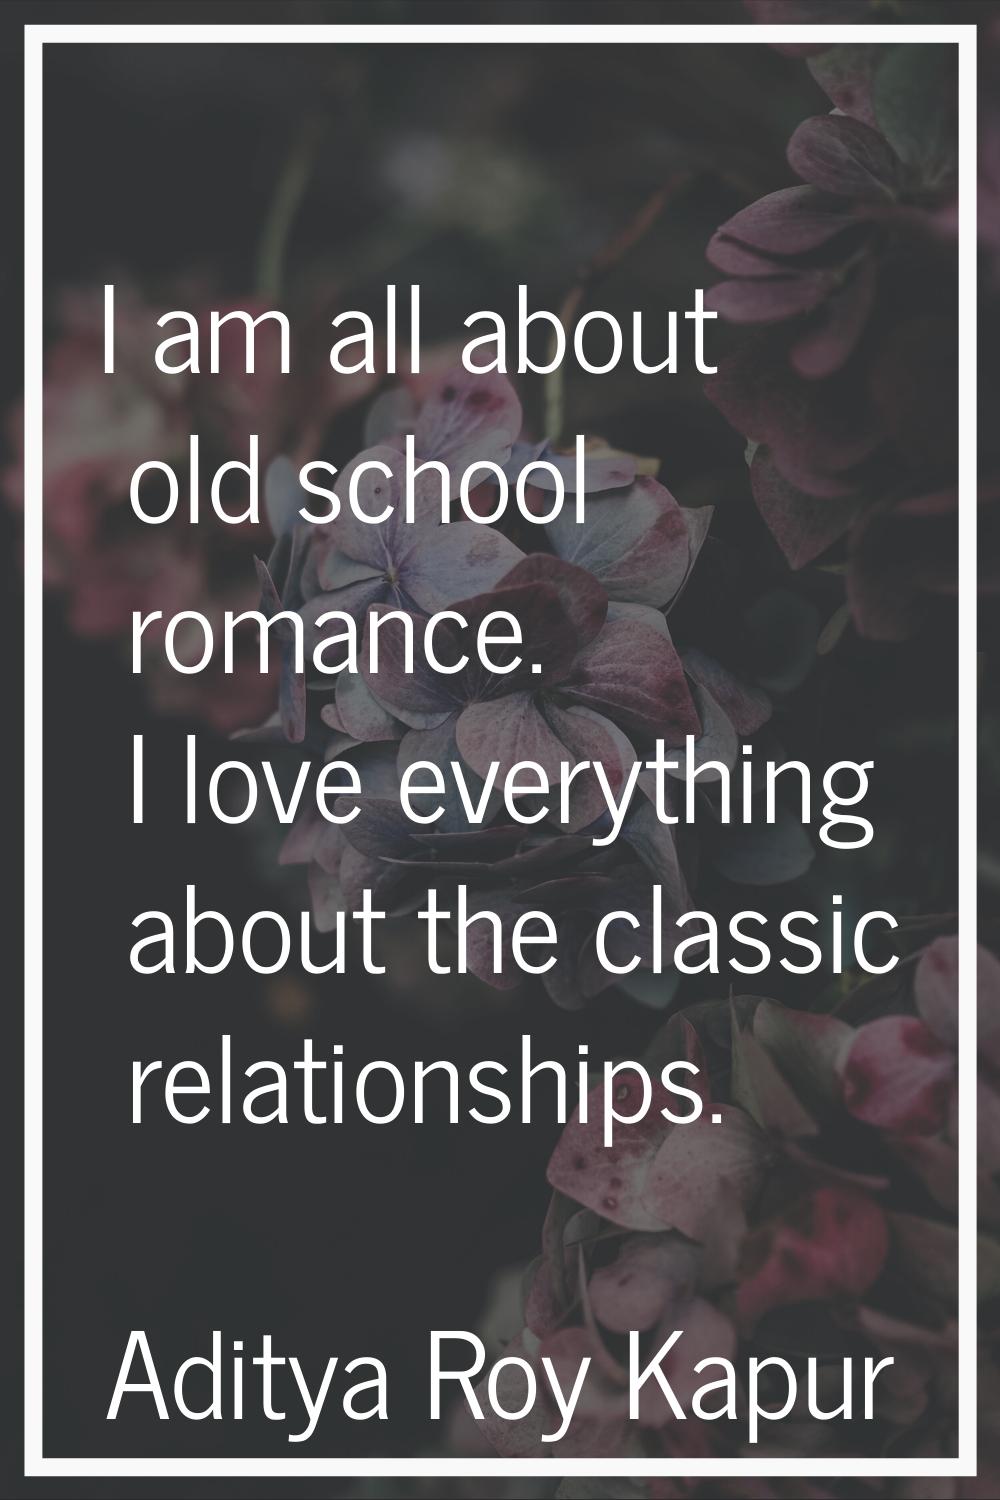 I am all about old school romance. I love everything about the classic relationships.